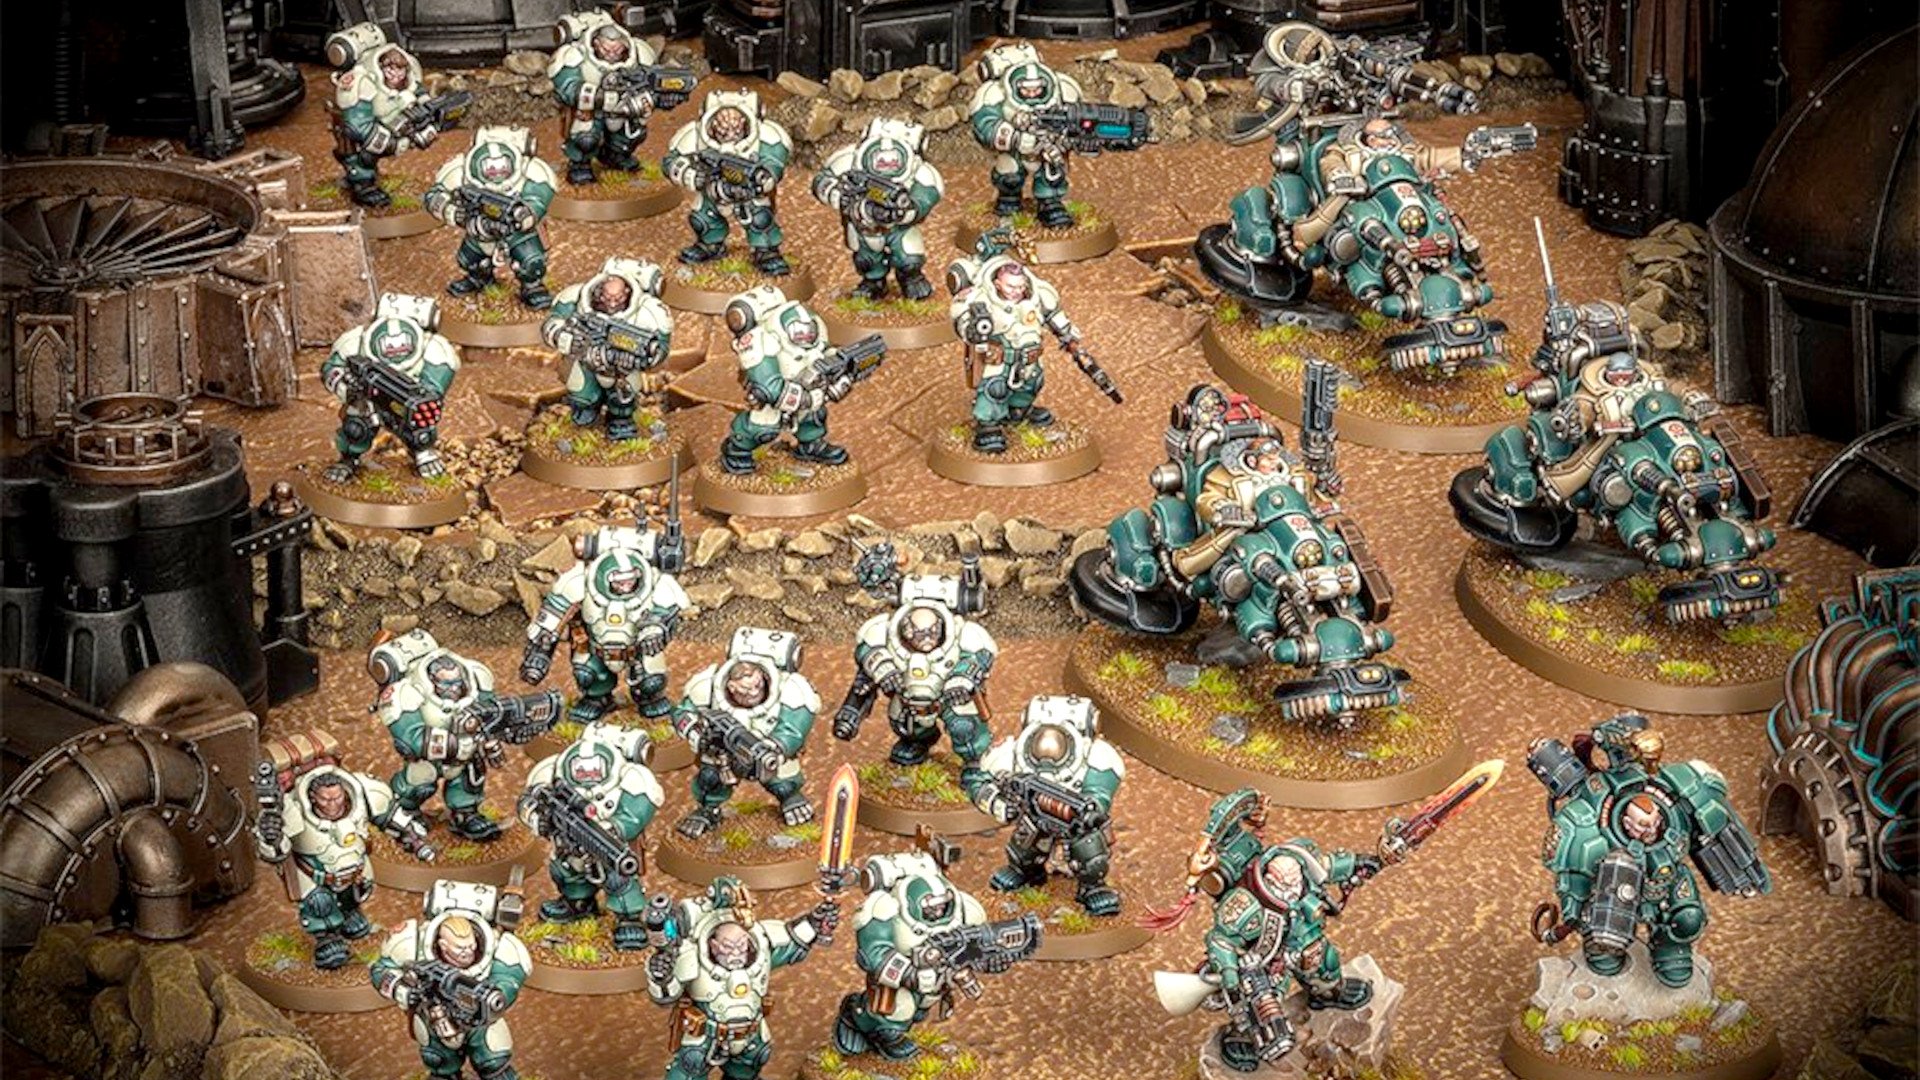 Warhammer 40k Leagues of Votann guide - Games Workshop photo showing the models in the Leagues of Votann army set